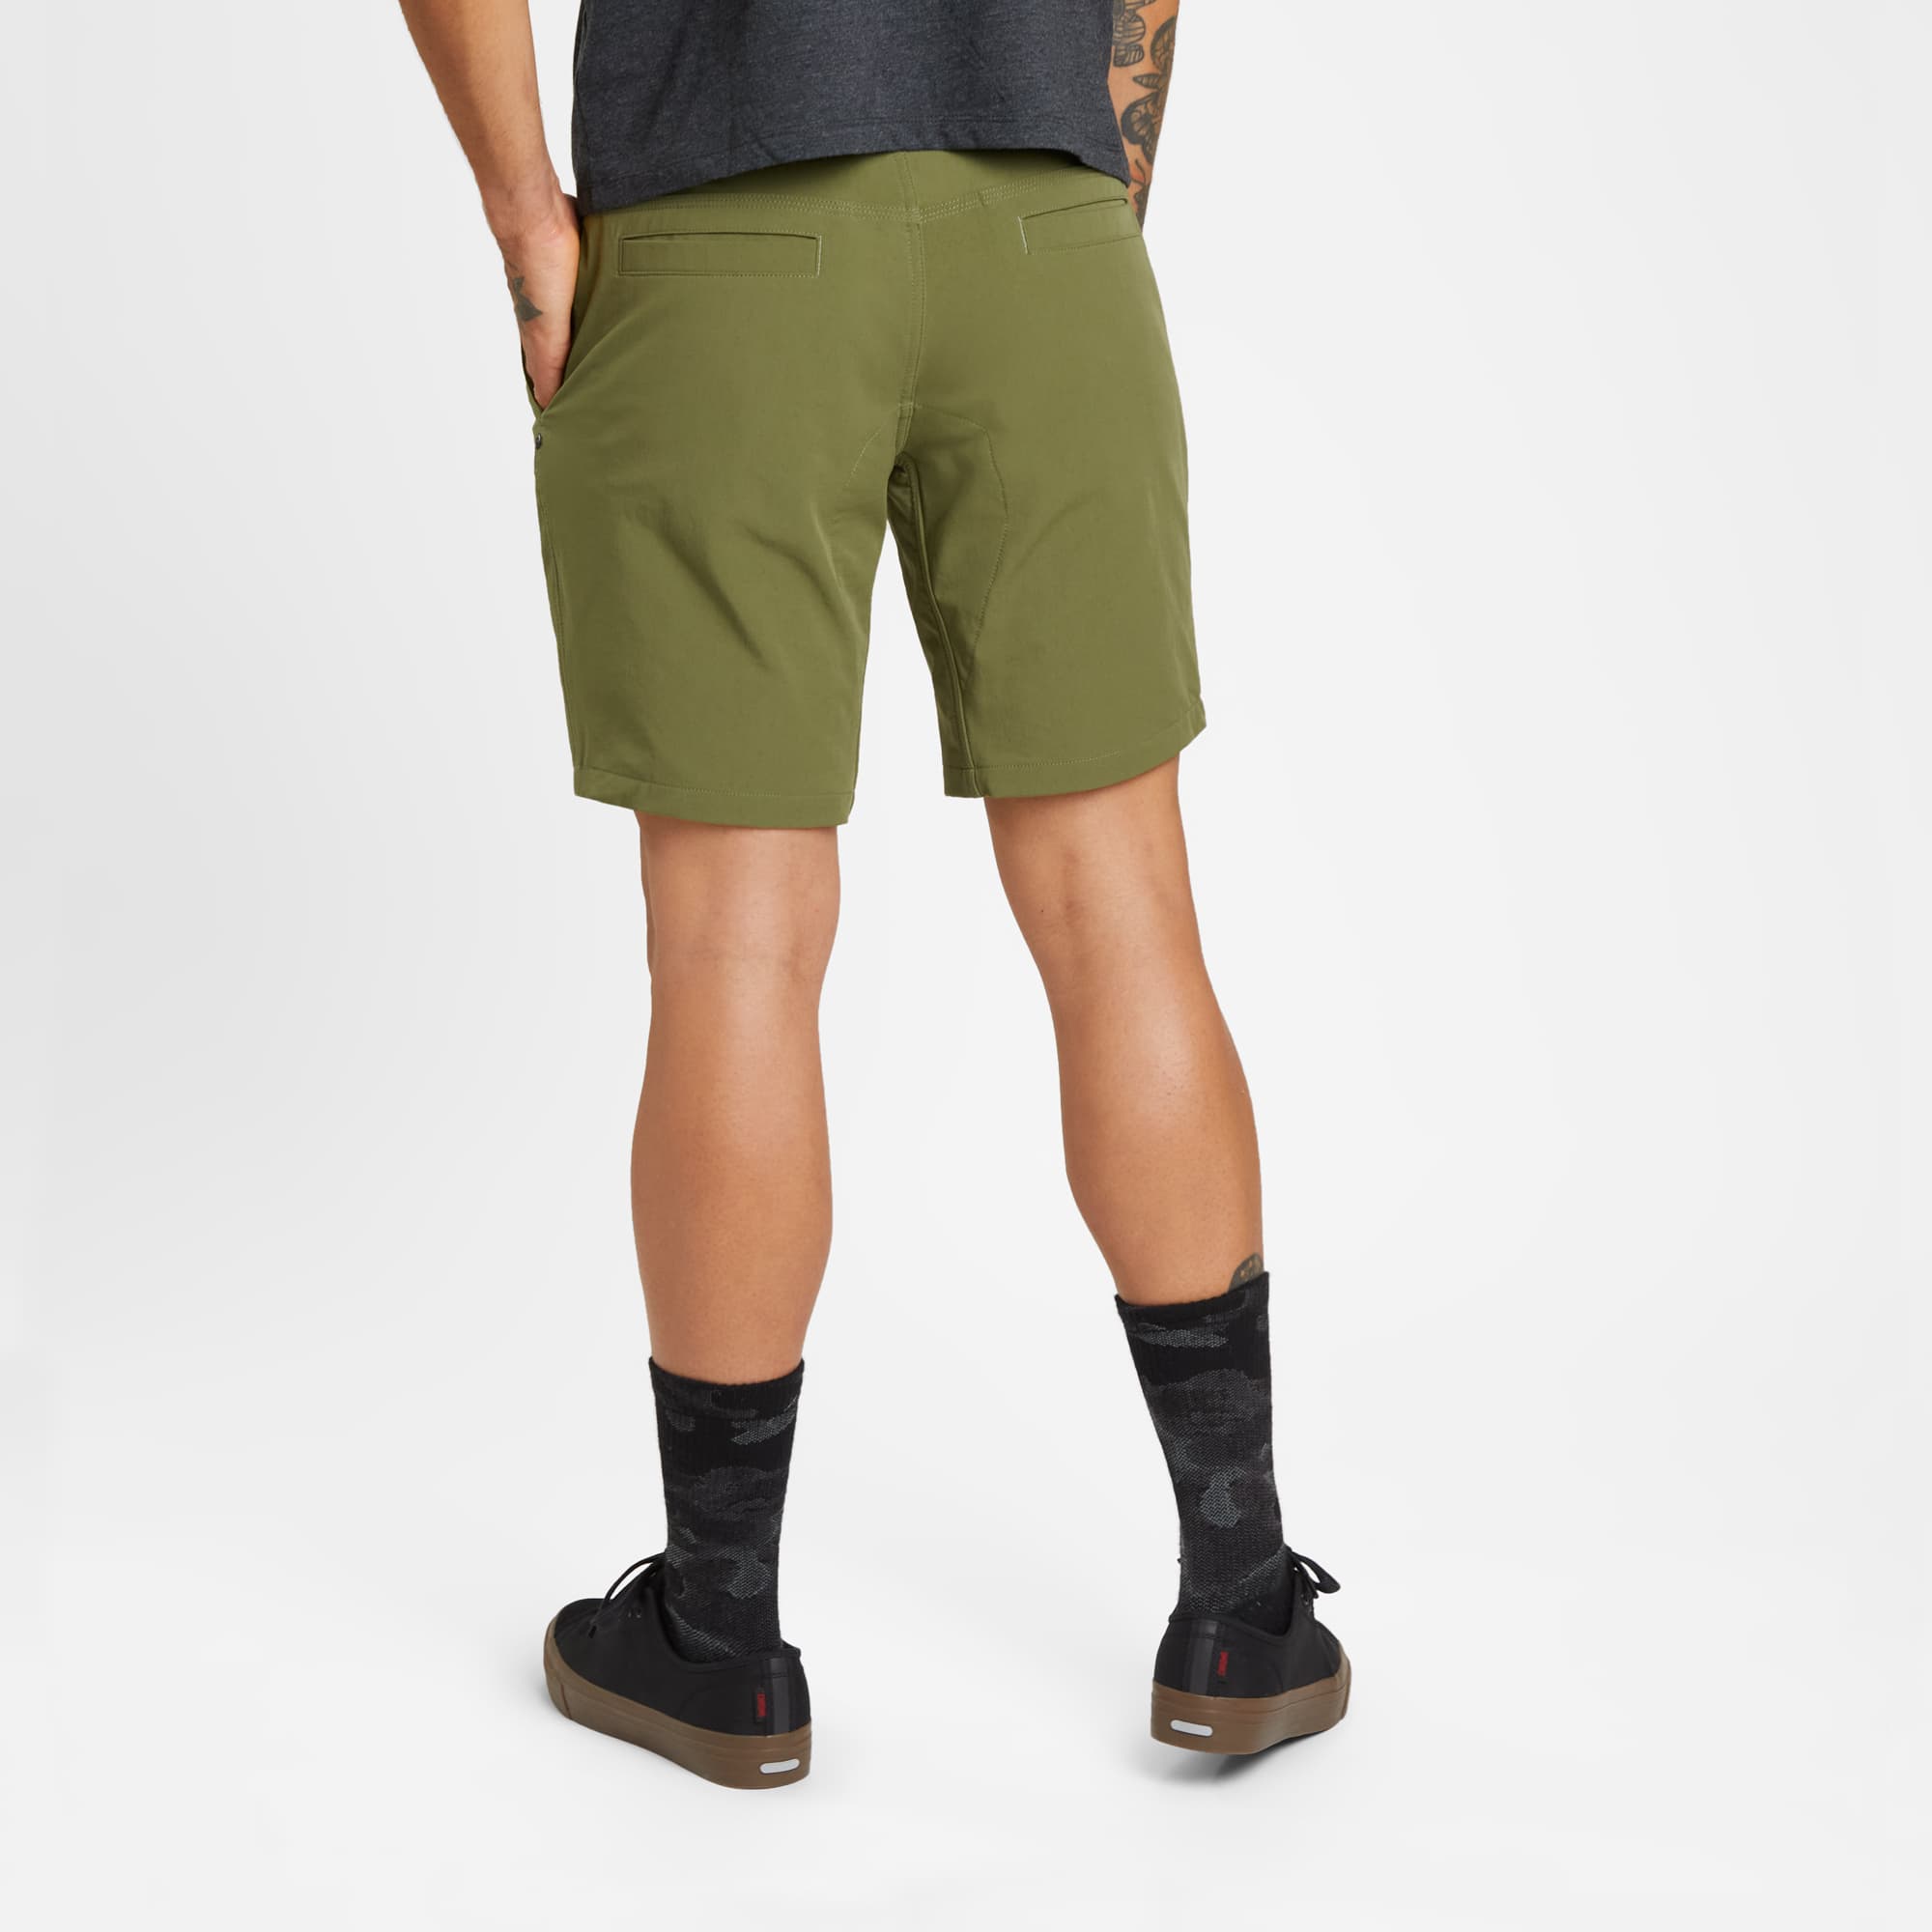 Men's tech Folsom Mid Short in green worn by a man back detail #color_olive branch